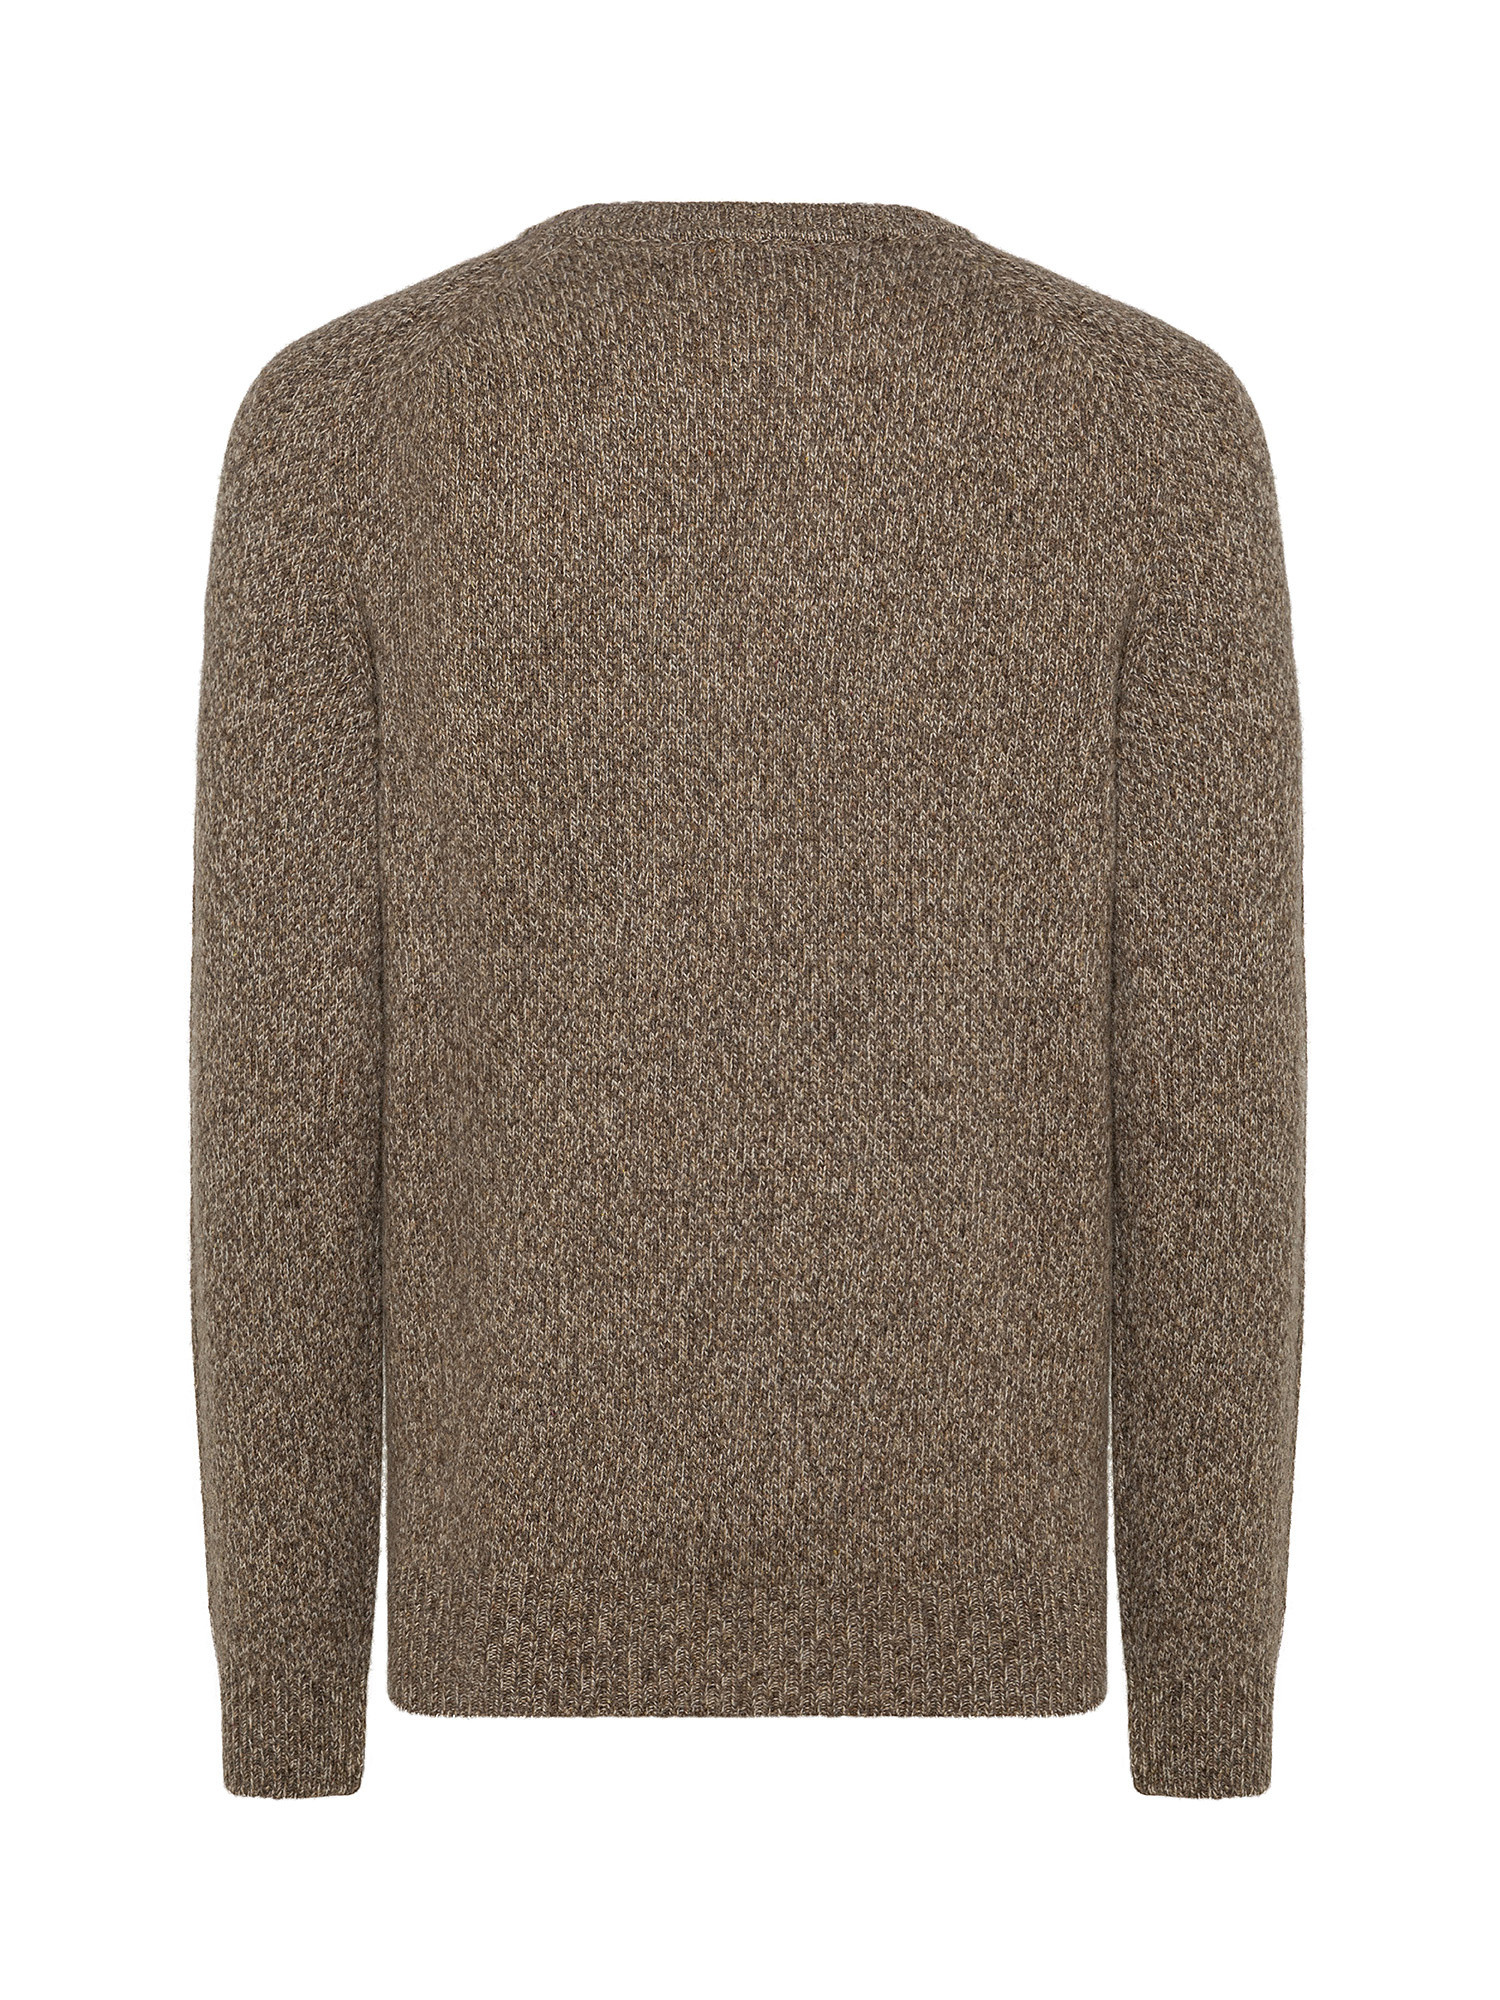 Pullover girocollo Mouline, Beige, large image number 1